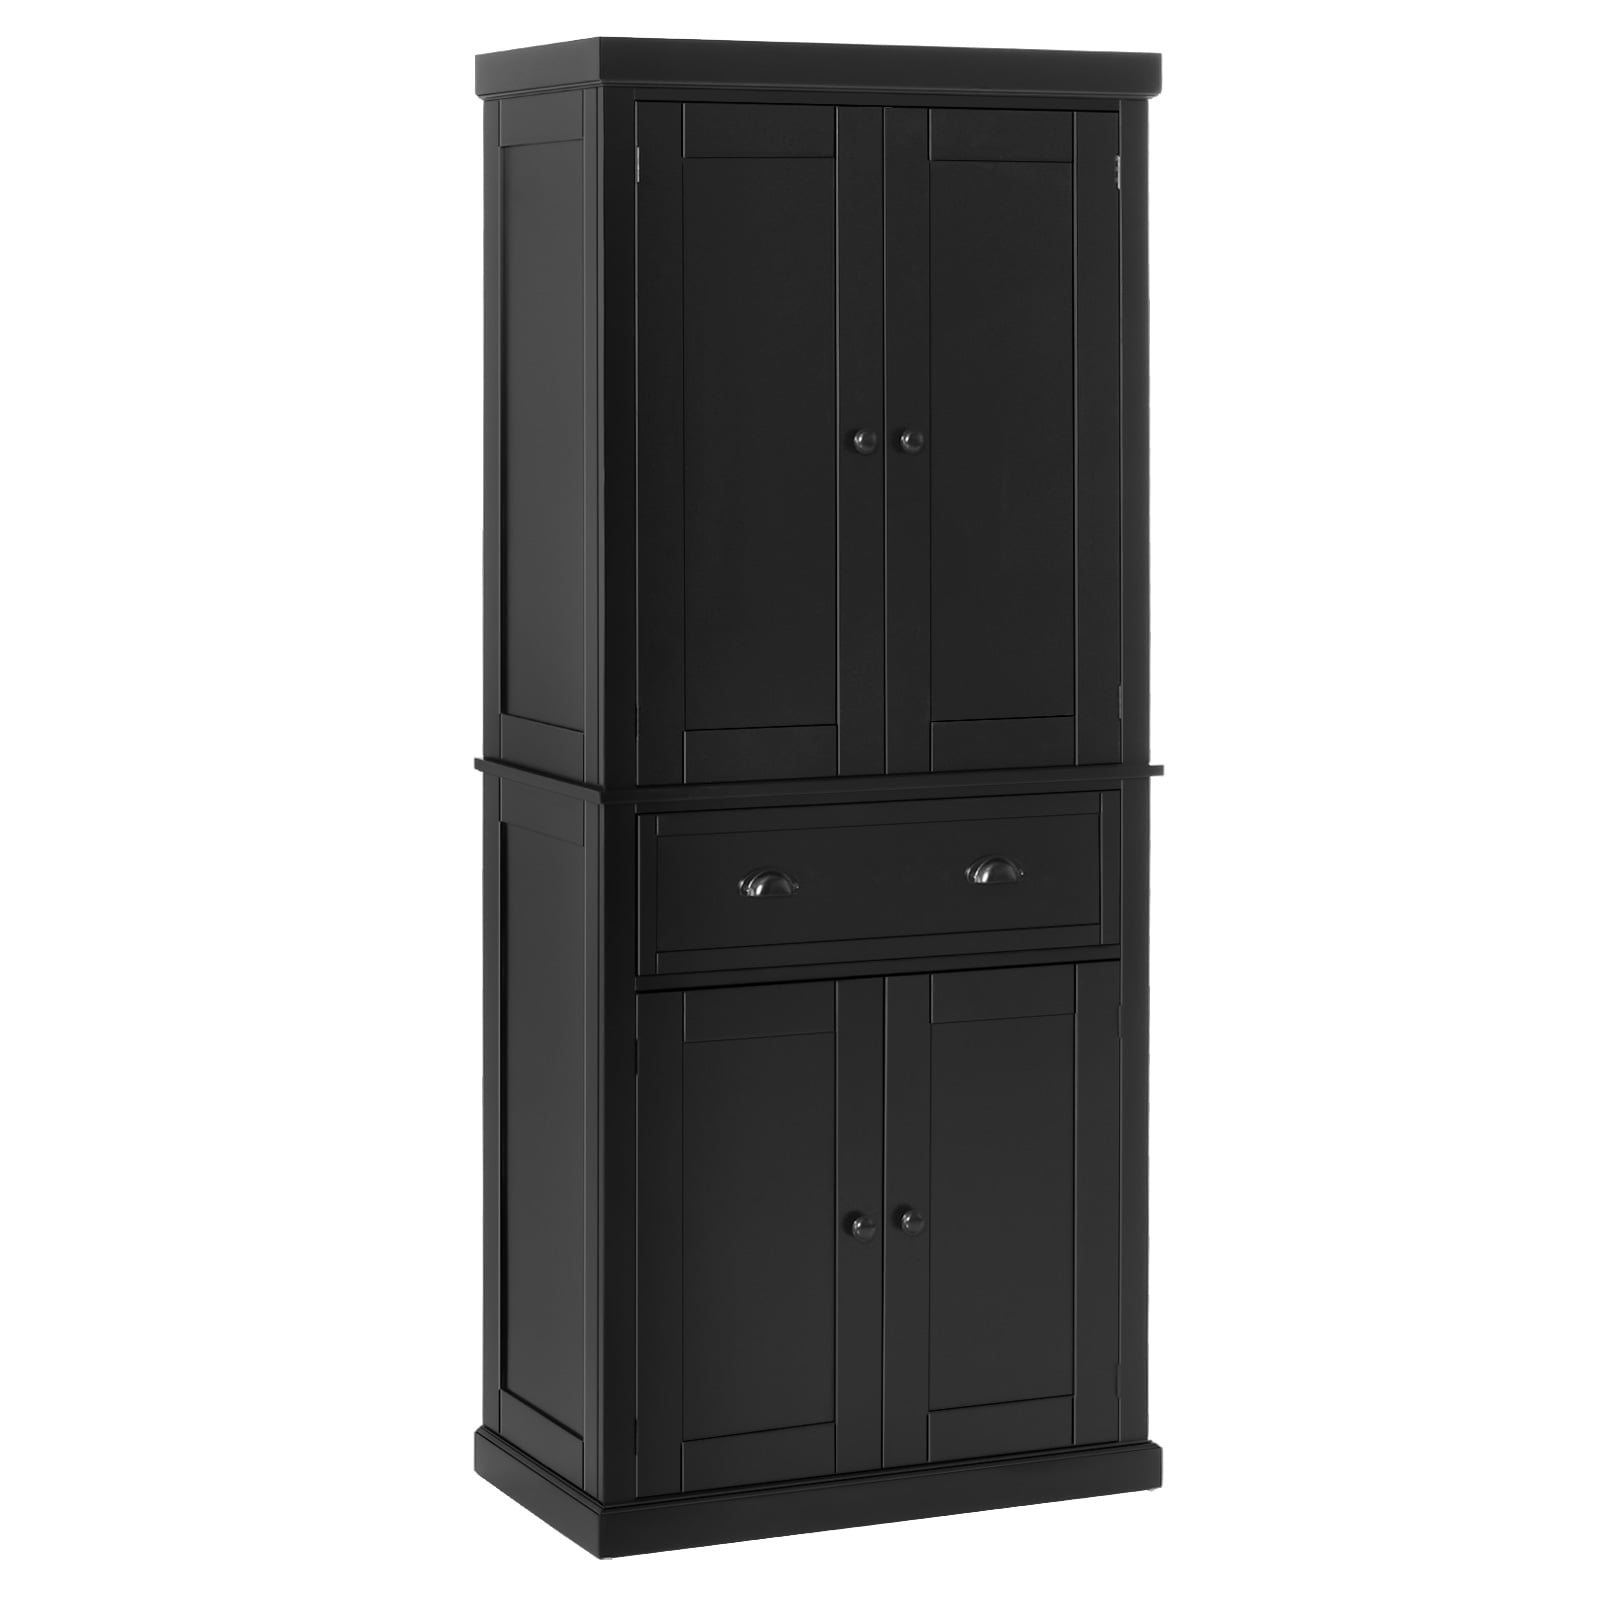 HomCom 72" Traditional Freestanding Kitchen Cupboard Pantry Cabinet with Elegant Colonial Design, Antique Hardware